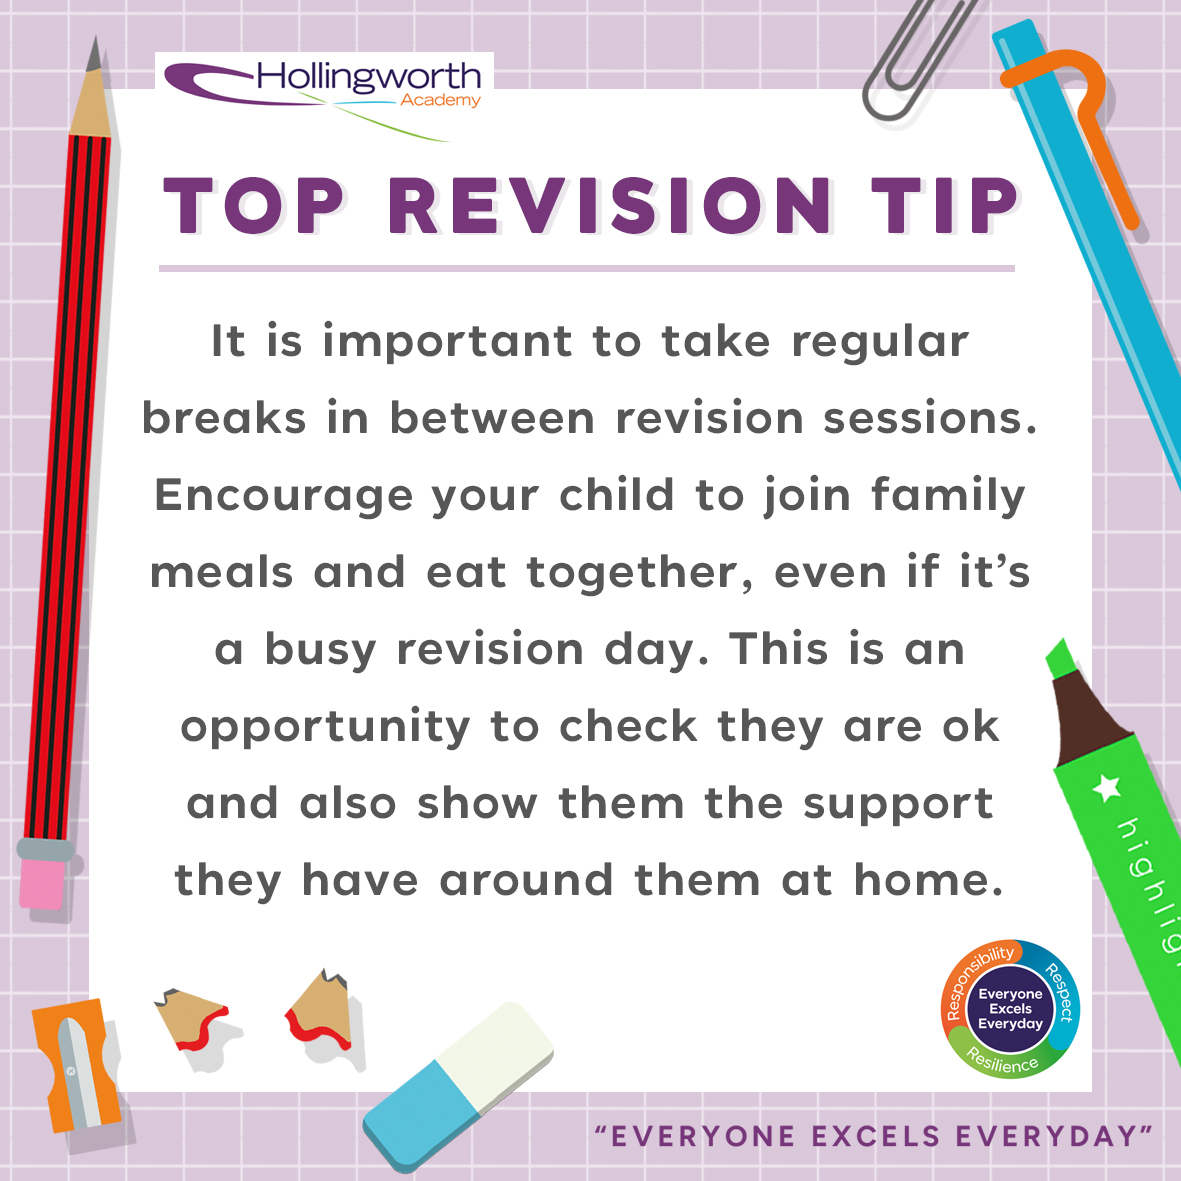 This week’s top revision tip for Year 11 parents and carers! @WCSQM #raisingrochdale #worldclass #everyoneexcelseveryday